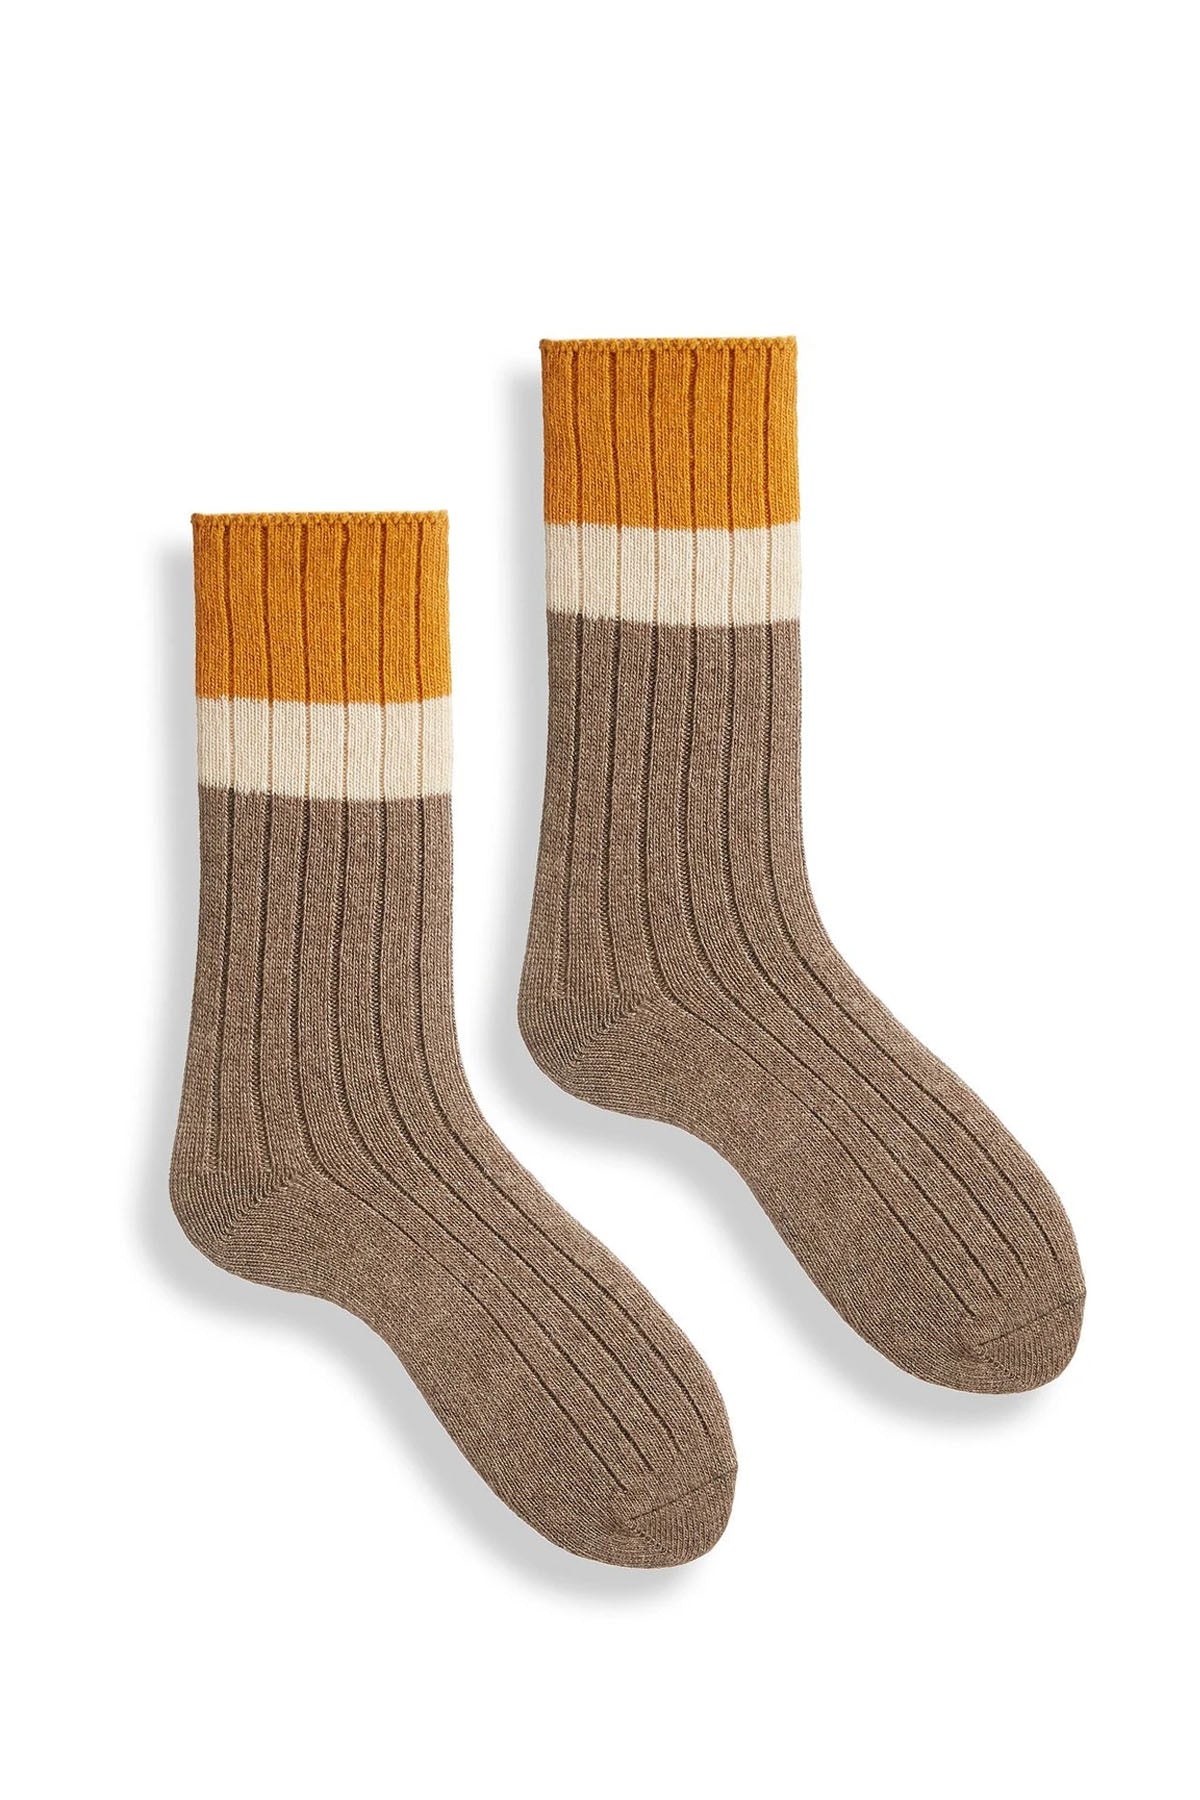 ribbed colorblock socks - assorted colors (click on image to see more)